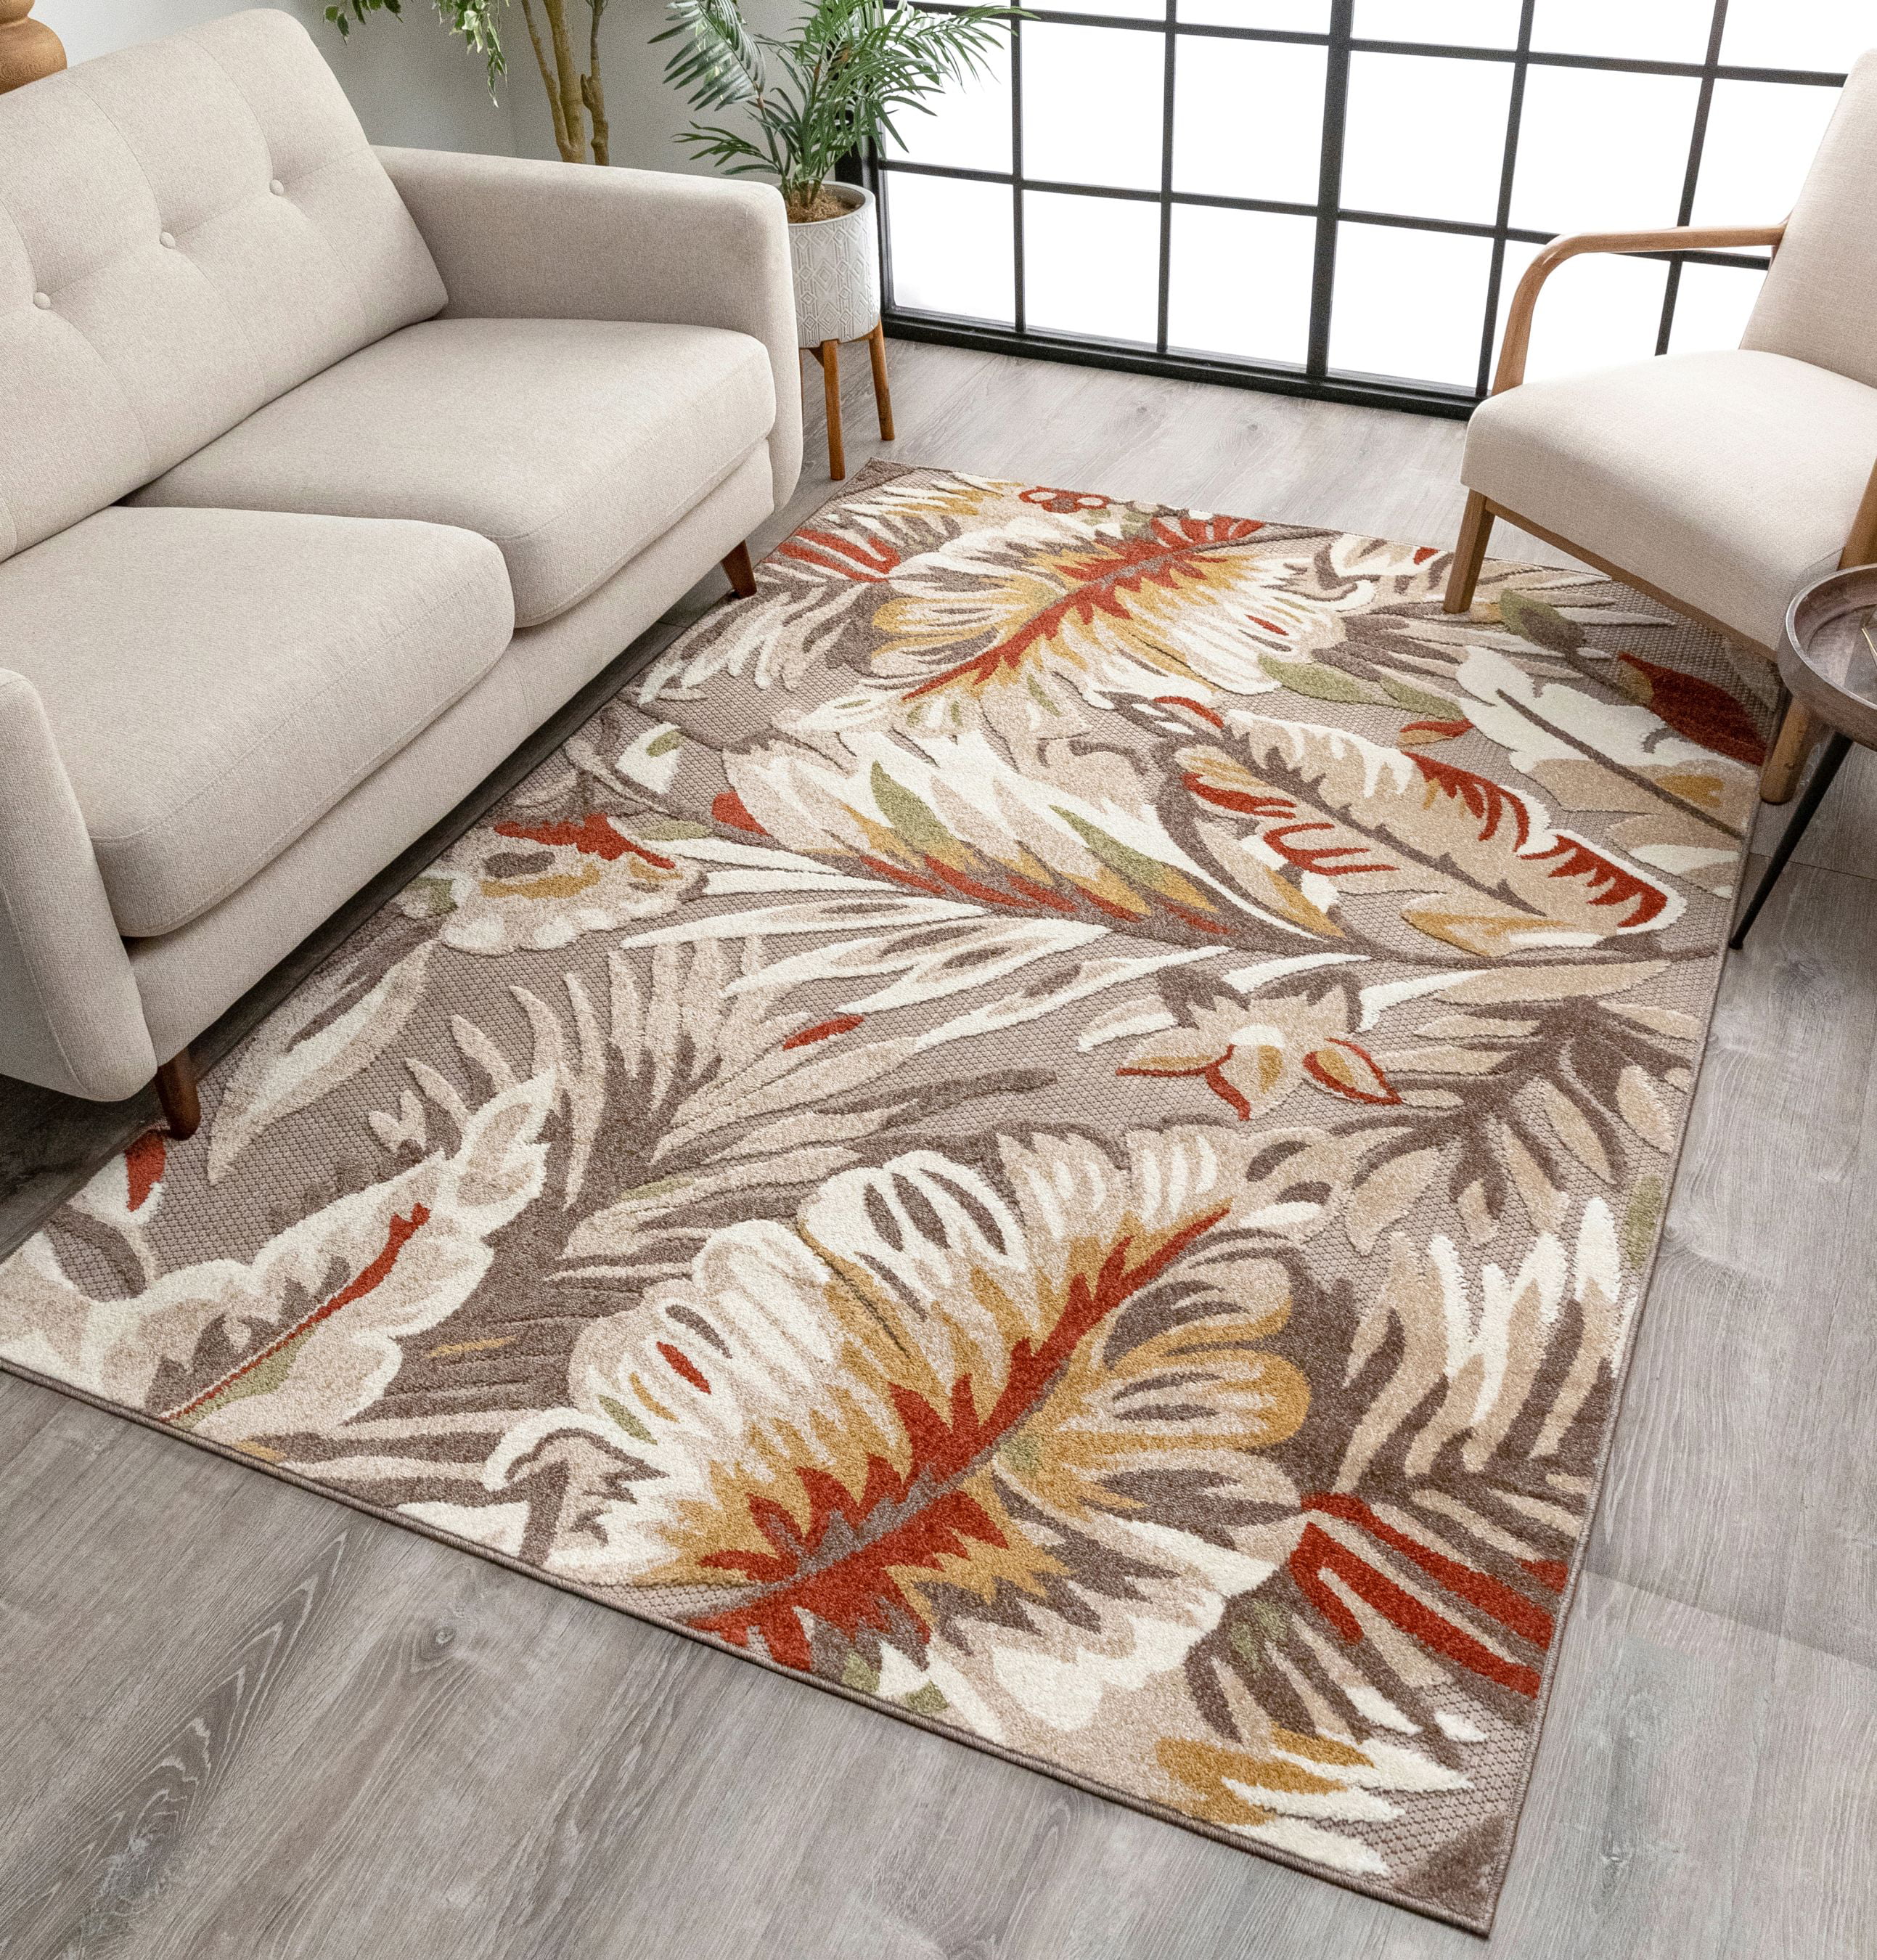 Well Woven Moira Floral Beige Indoor/Outdoor Area Rug High Traffic ...